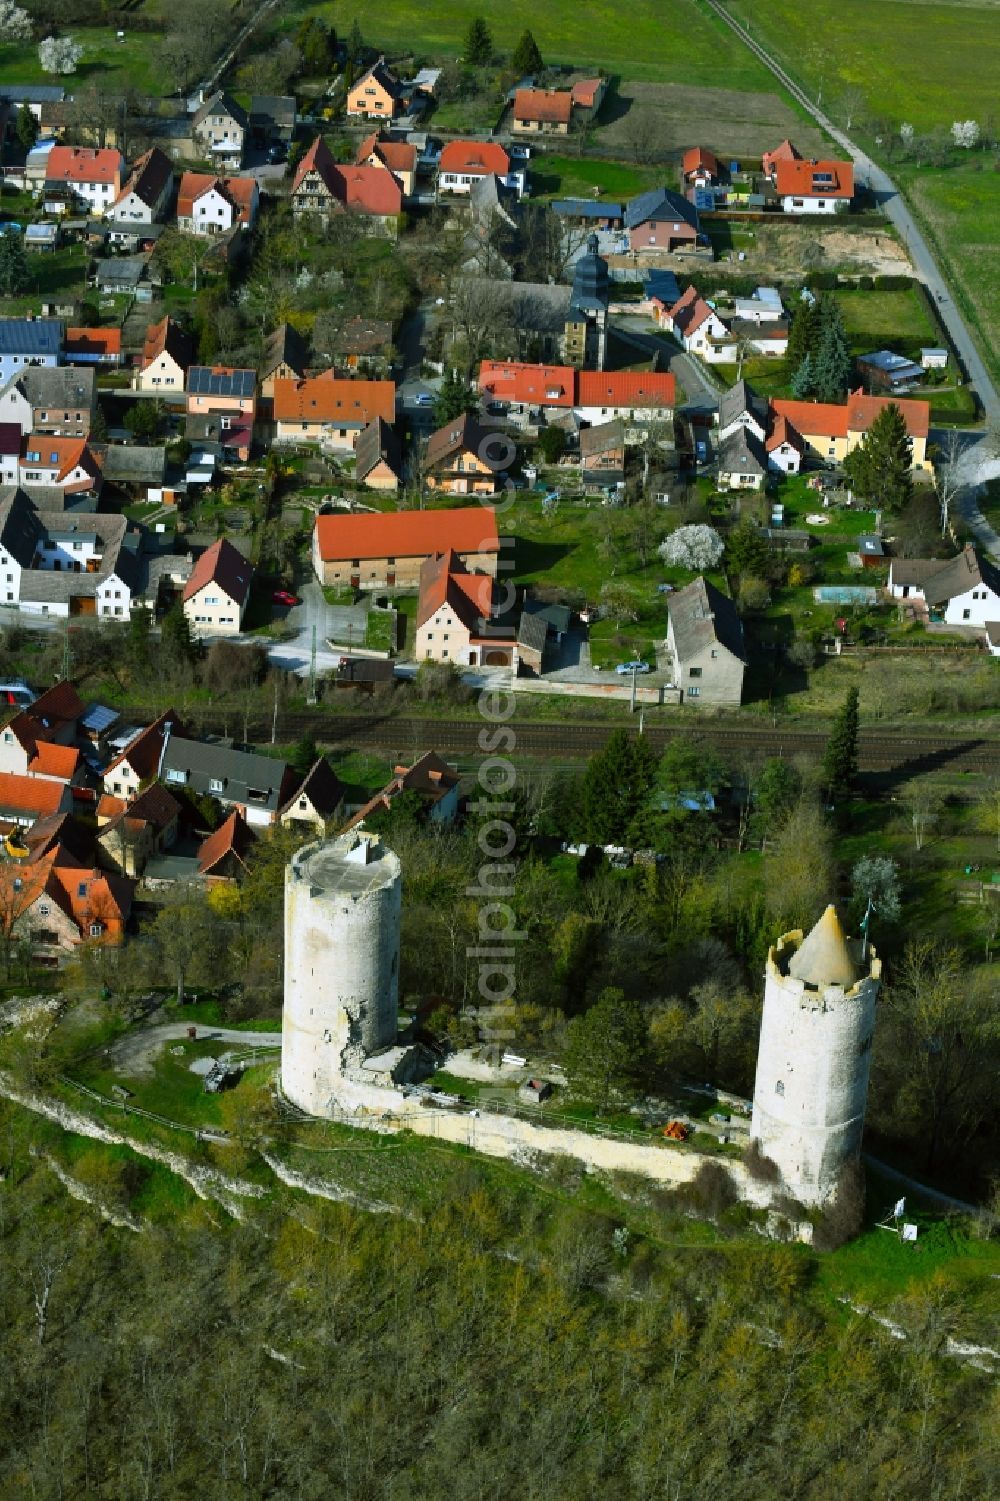 Saaleck from the bird's eye view: Castle of the fortress Burg Saaleck in Saaleck in the state Saxony-Anhalt, Germany